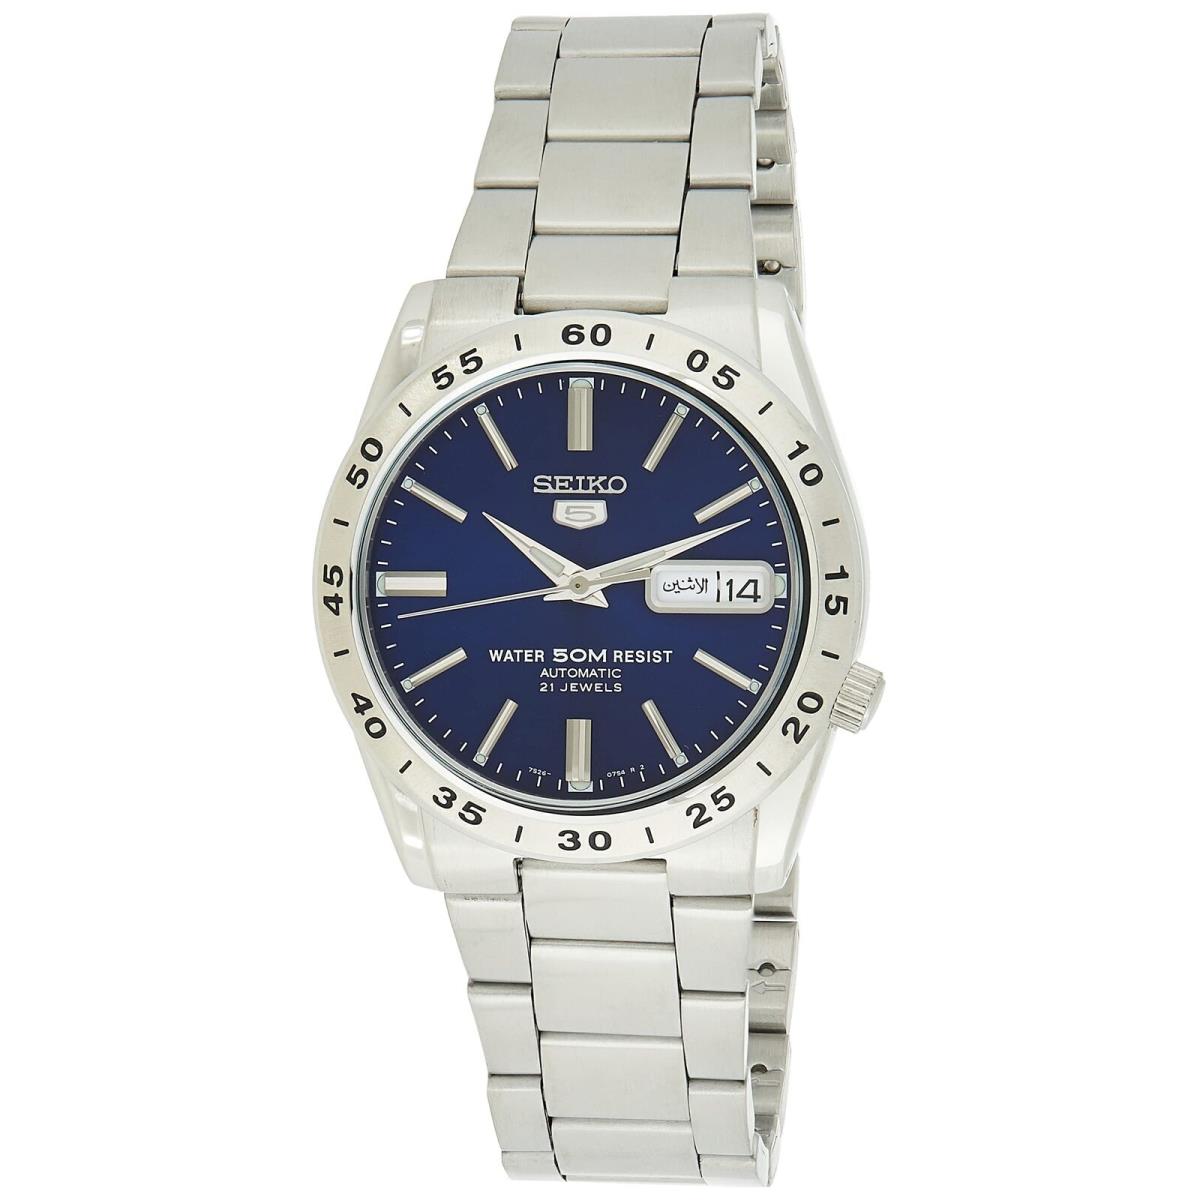 Seiko Men`s SNKD99 5 Stainless Steel Blue Dial Watch